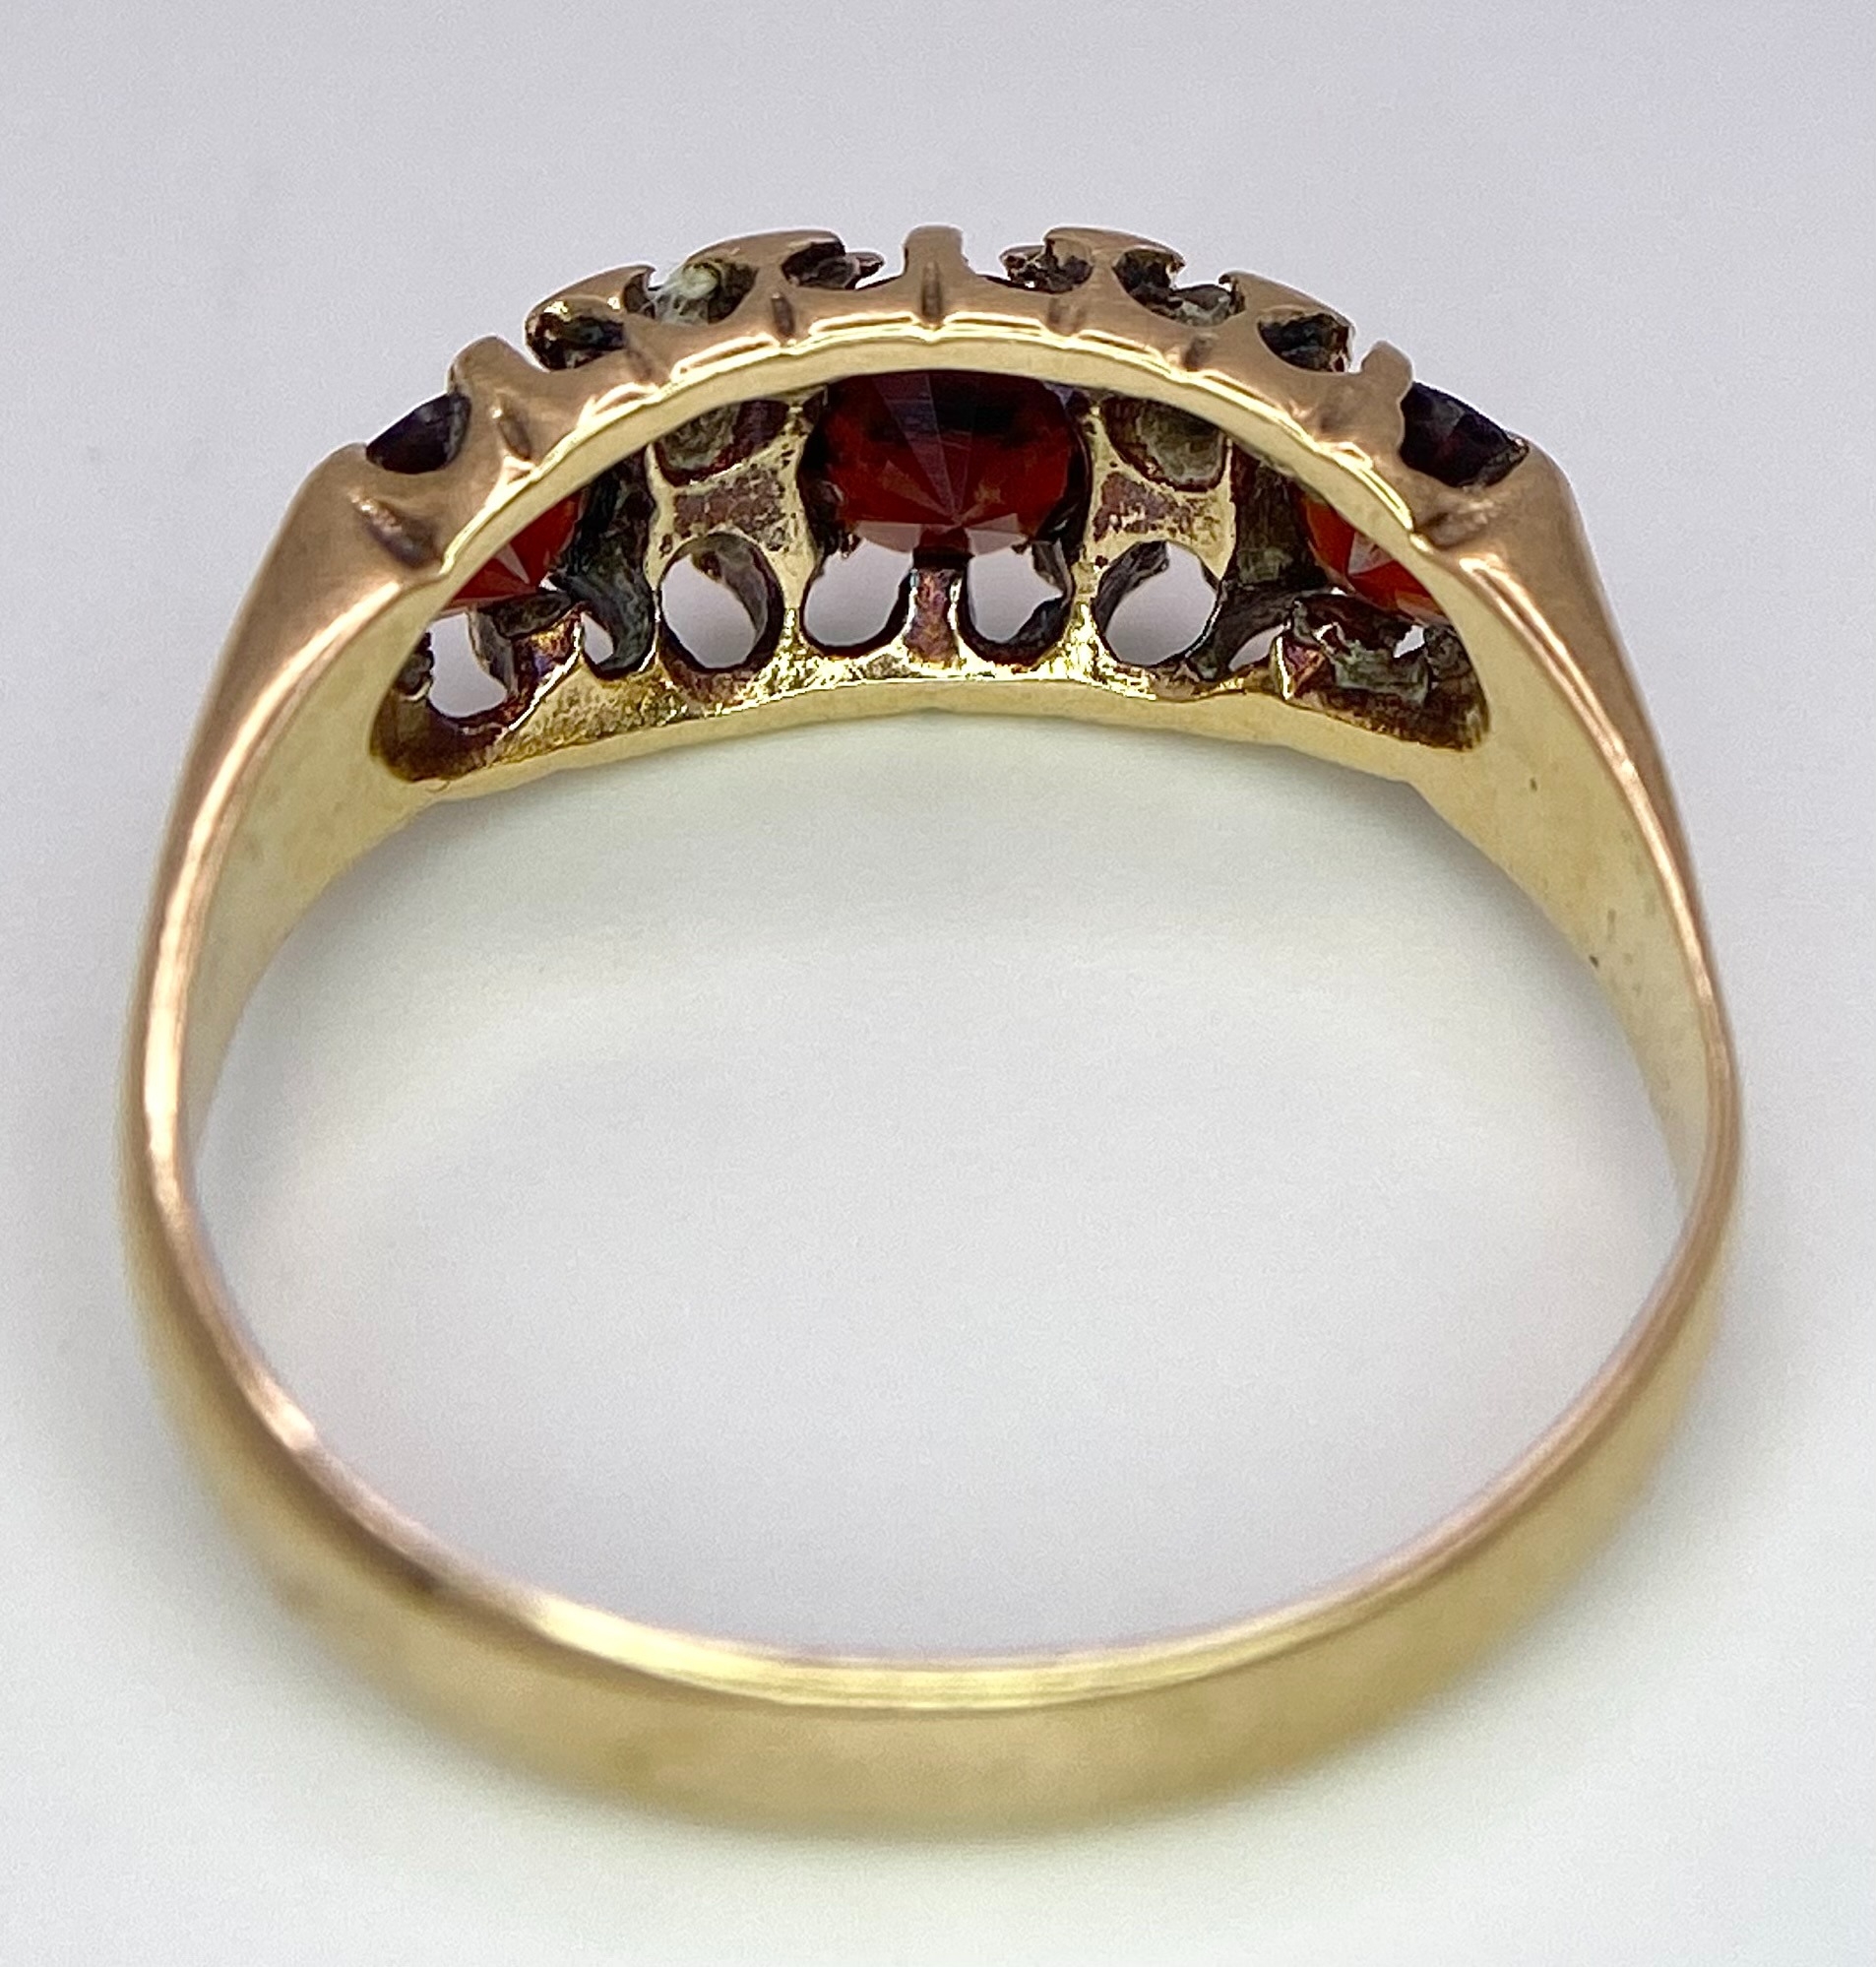 A 9K Yellow Gold, Garnet and Diamond Ring. Size K, 1.9g total weight. Comes in presentation case. - Image 5 of 7